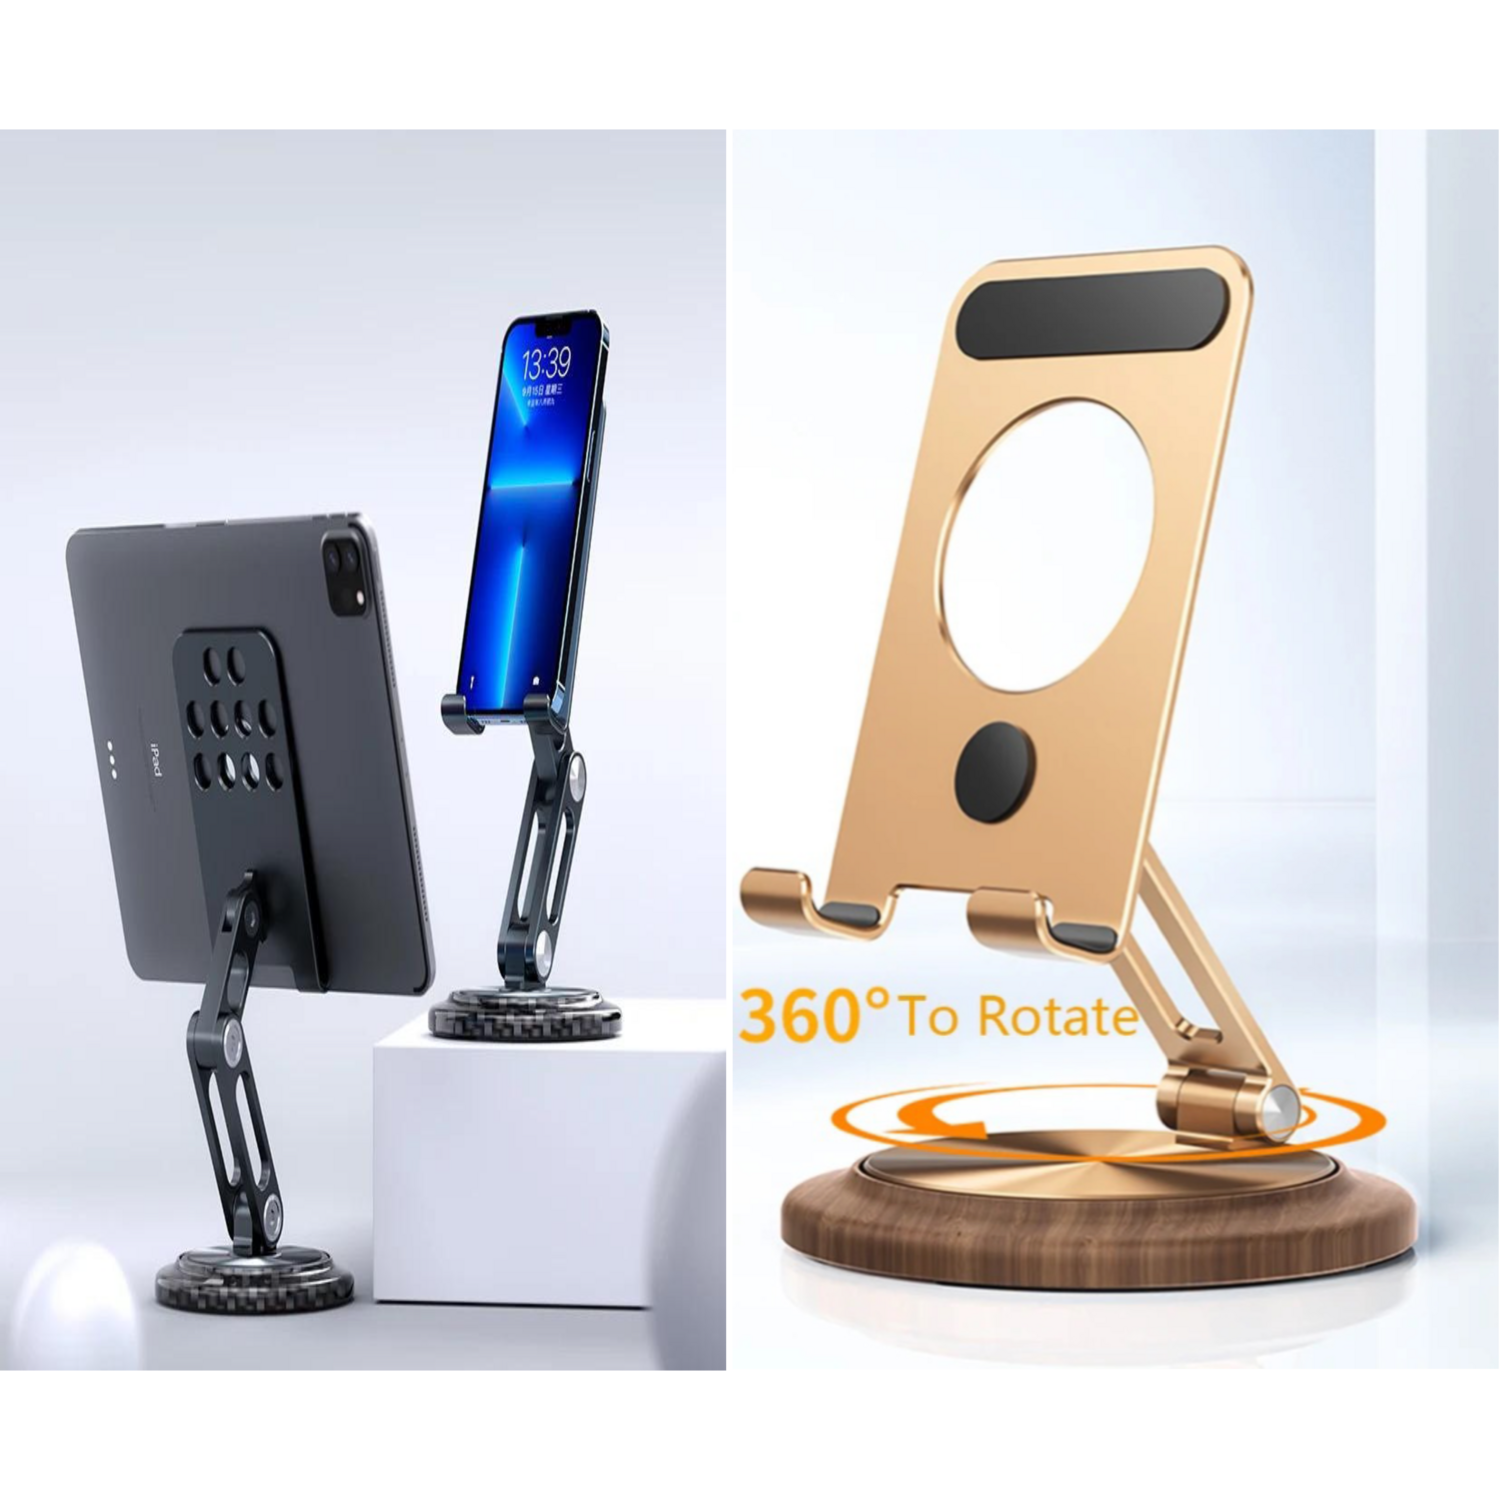 A luxurious, 360-degree moveable office stand for iPad and phones, two colors, wooden and carbon